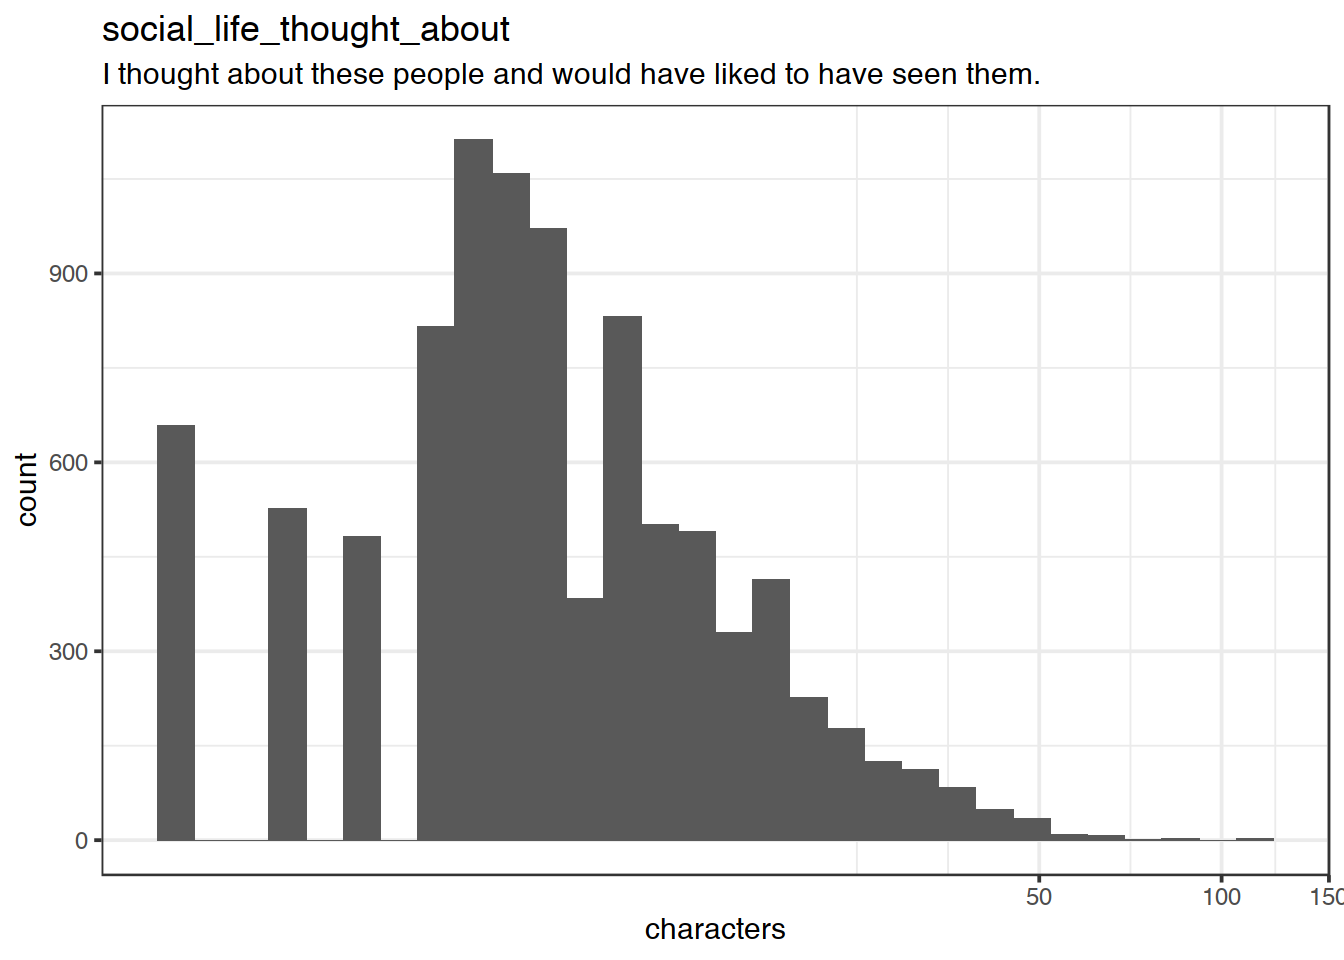 Distribution of values for social_life_thought_about